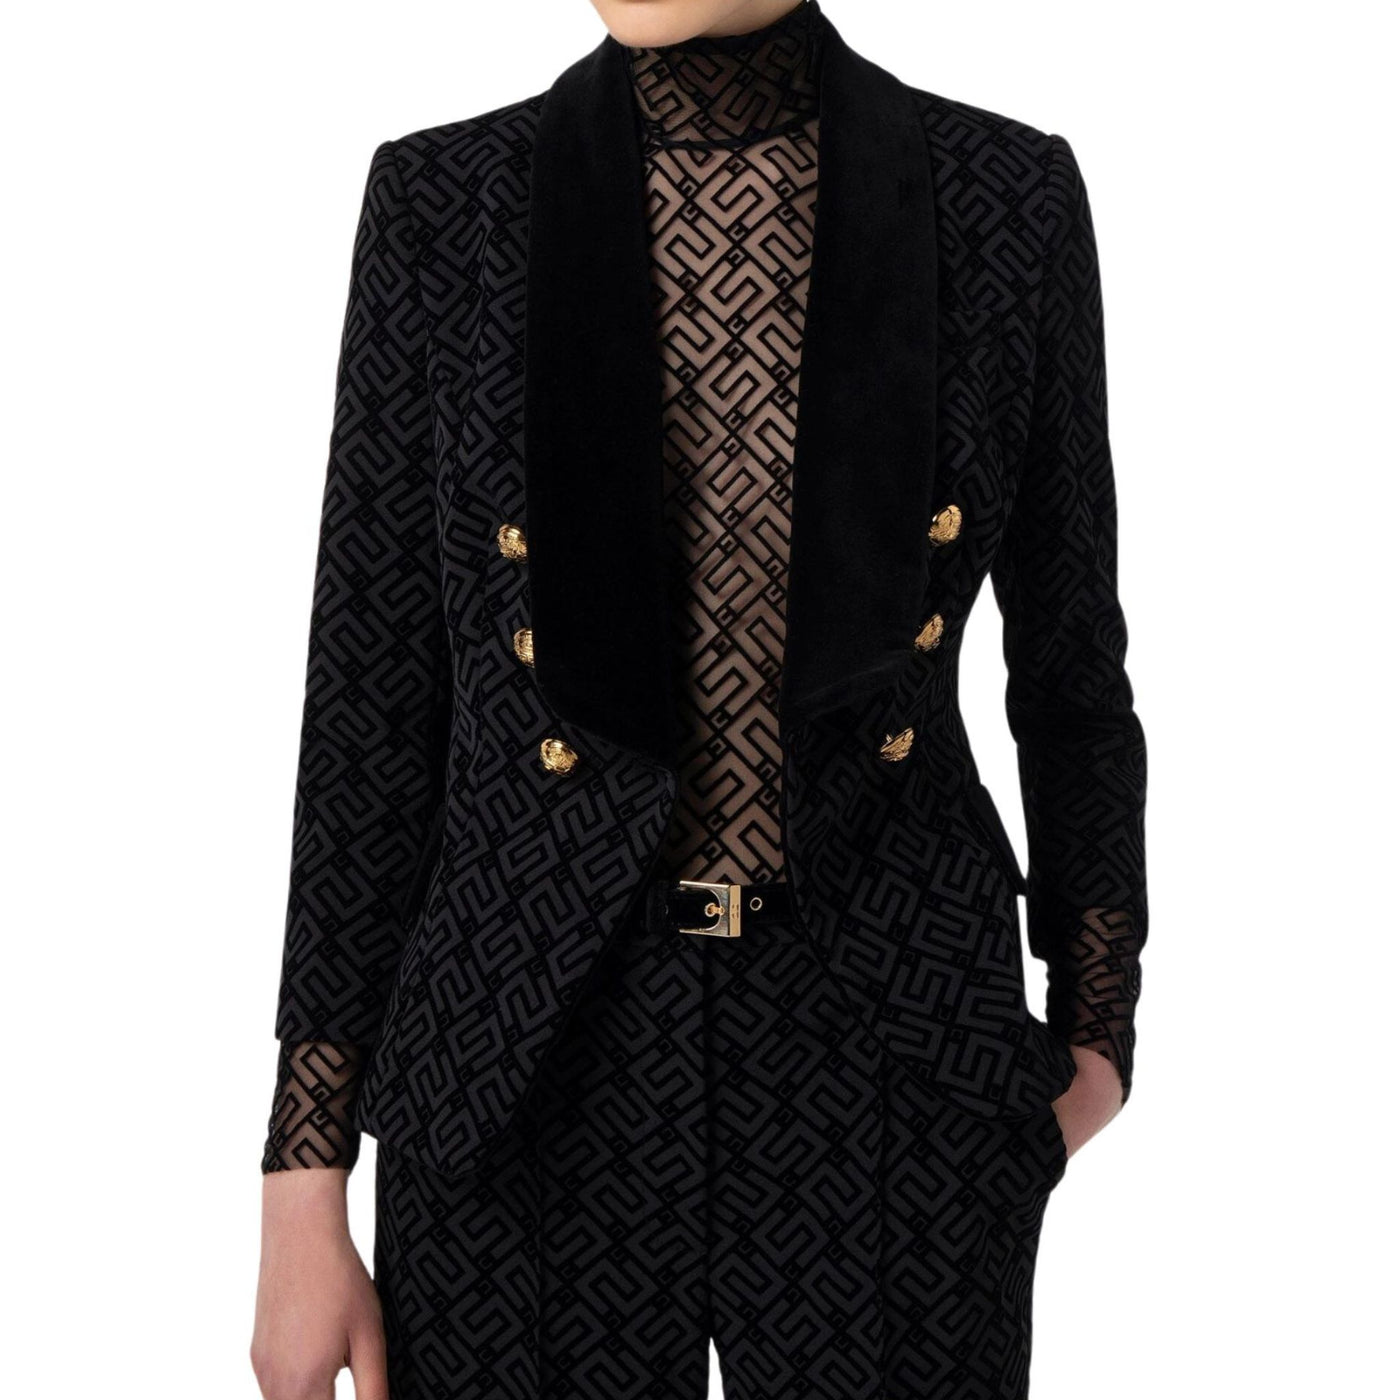 Women's jacket with all-over print